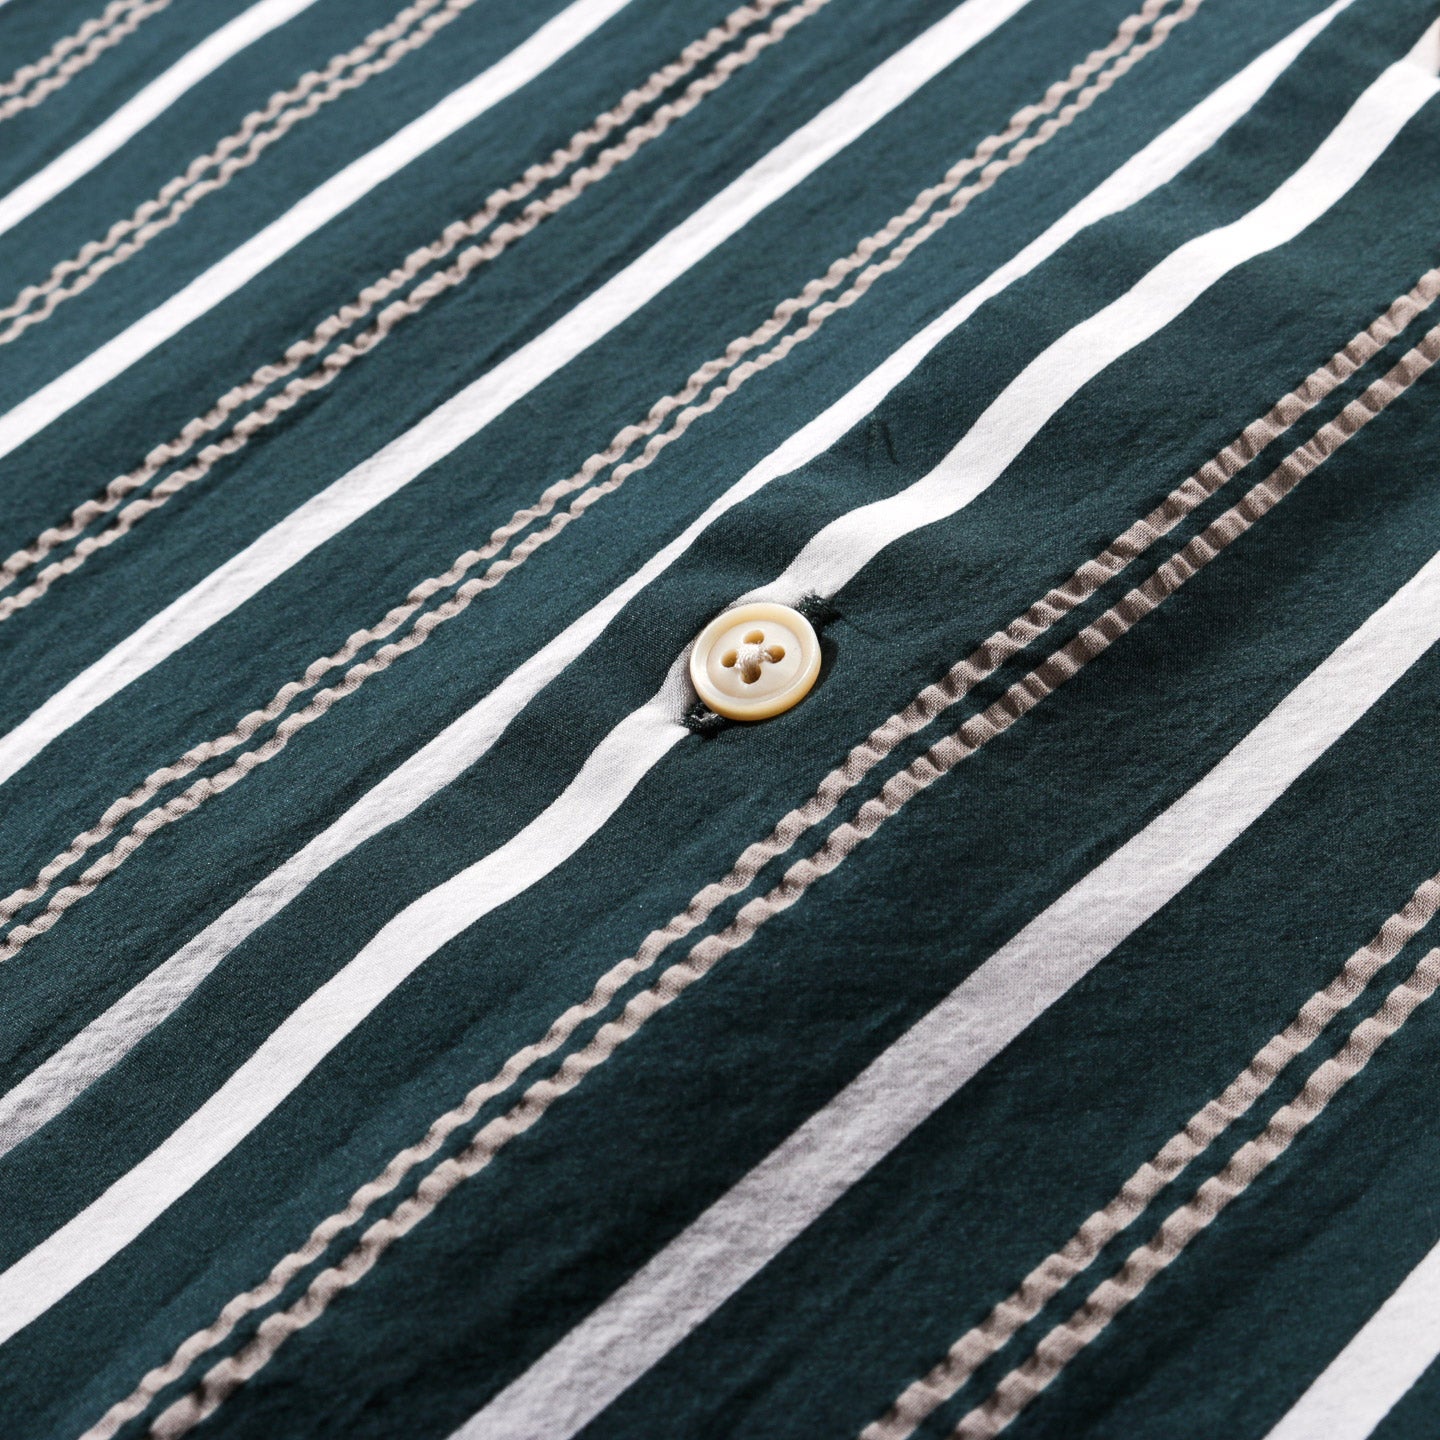 A KIND OF GUISE ELIO SHIRT RACING GREEN STRIPE